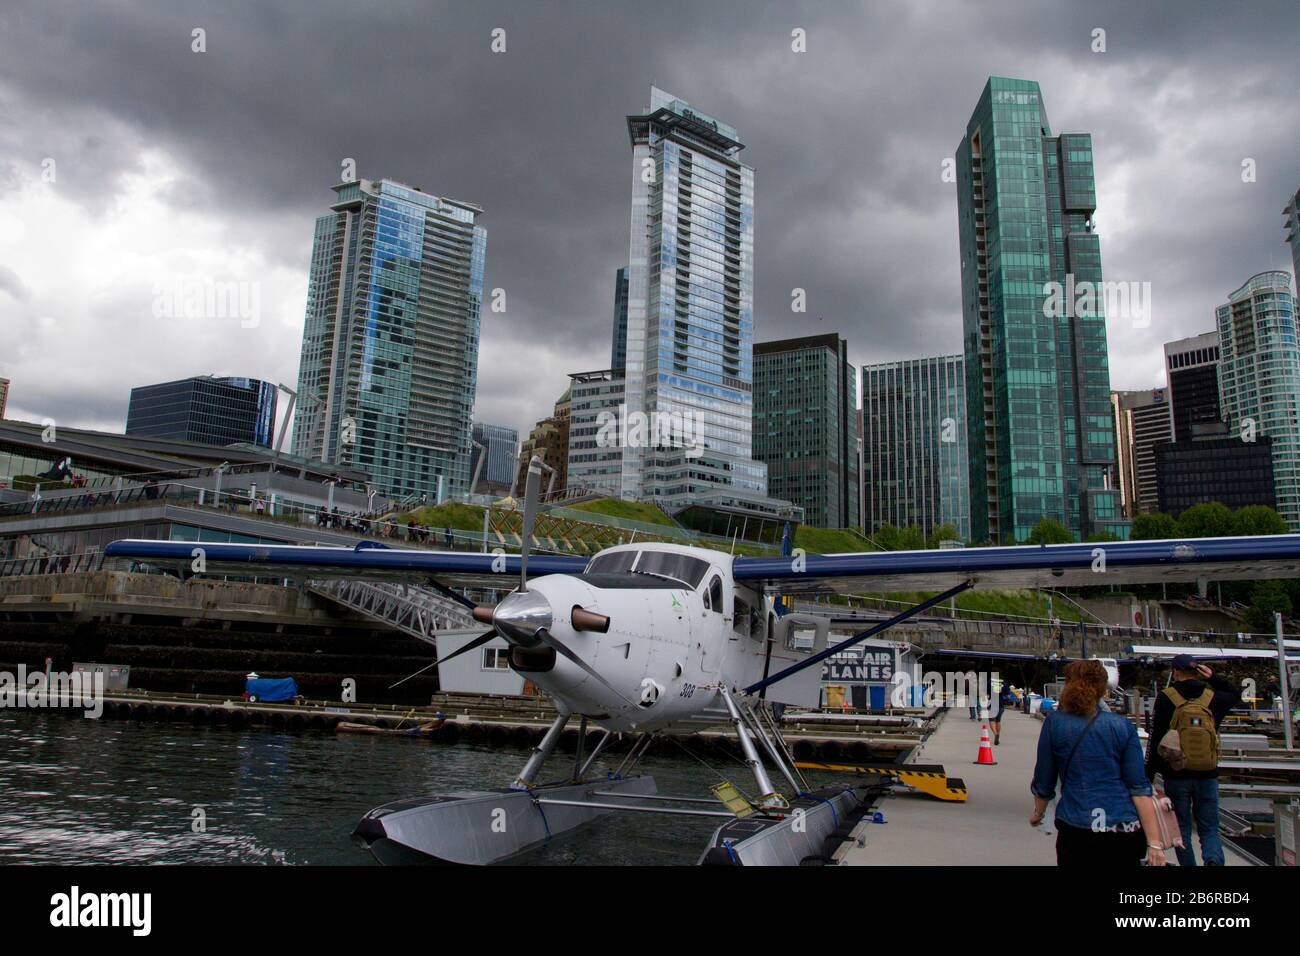 A Harbour Air DHC-3 de Havilland Turbine Single Otter seaplane at Coal Harbour, Vancouver, BC, Canada with skyscrapers and a stormy sky in background Stock Photo